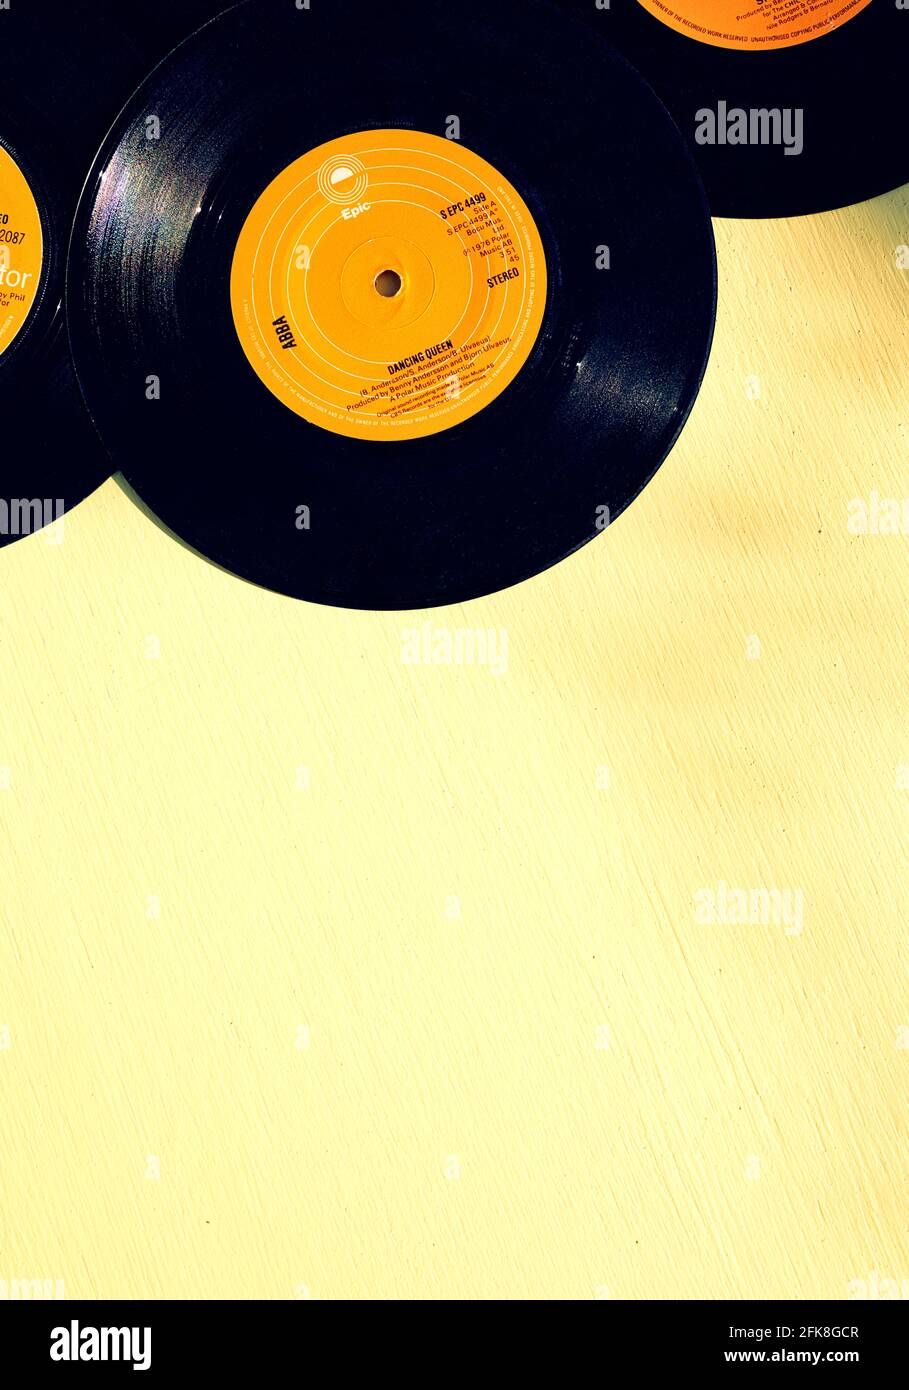 Dancing Queen by Abba 7 inch 45 rpm vinyl record on wooden yellow background outdoors. Concept of retro, nostalgia, yesteryear vintage Stock Photo